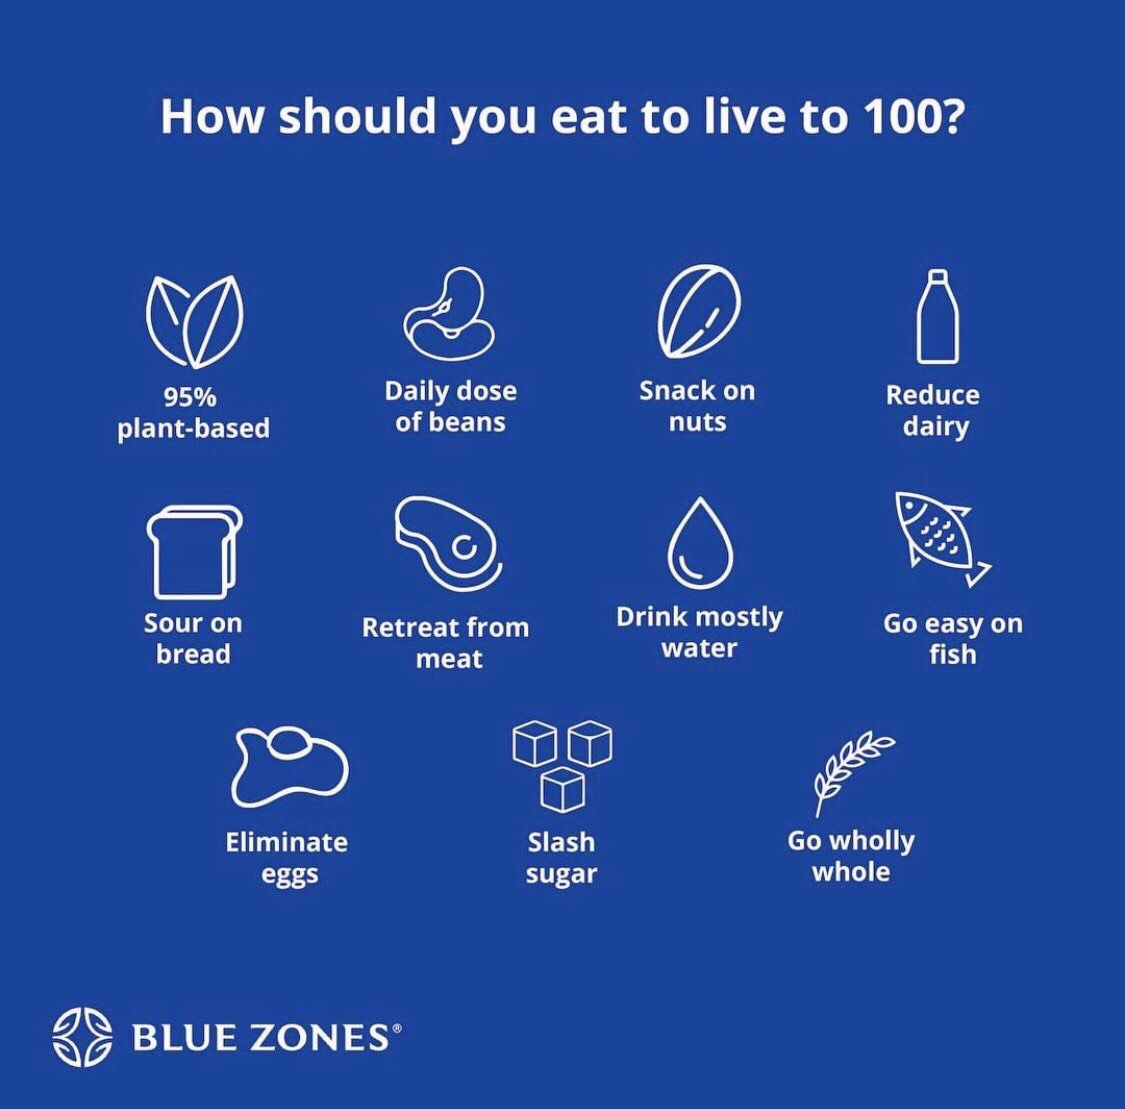 The Blue Zones Food Guidelines are based on a meta analysis of 150 dietary studies conducted in the blue zones regions of the world. Just remember: BEANS, GREENS, GRAINS, NUTS. 🥦🍚🥜 
Repost @BlueZones // #BZPHawaii #LiveLongerBetter #BlueZones #Power9 #wellnesswednesday